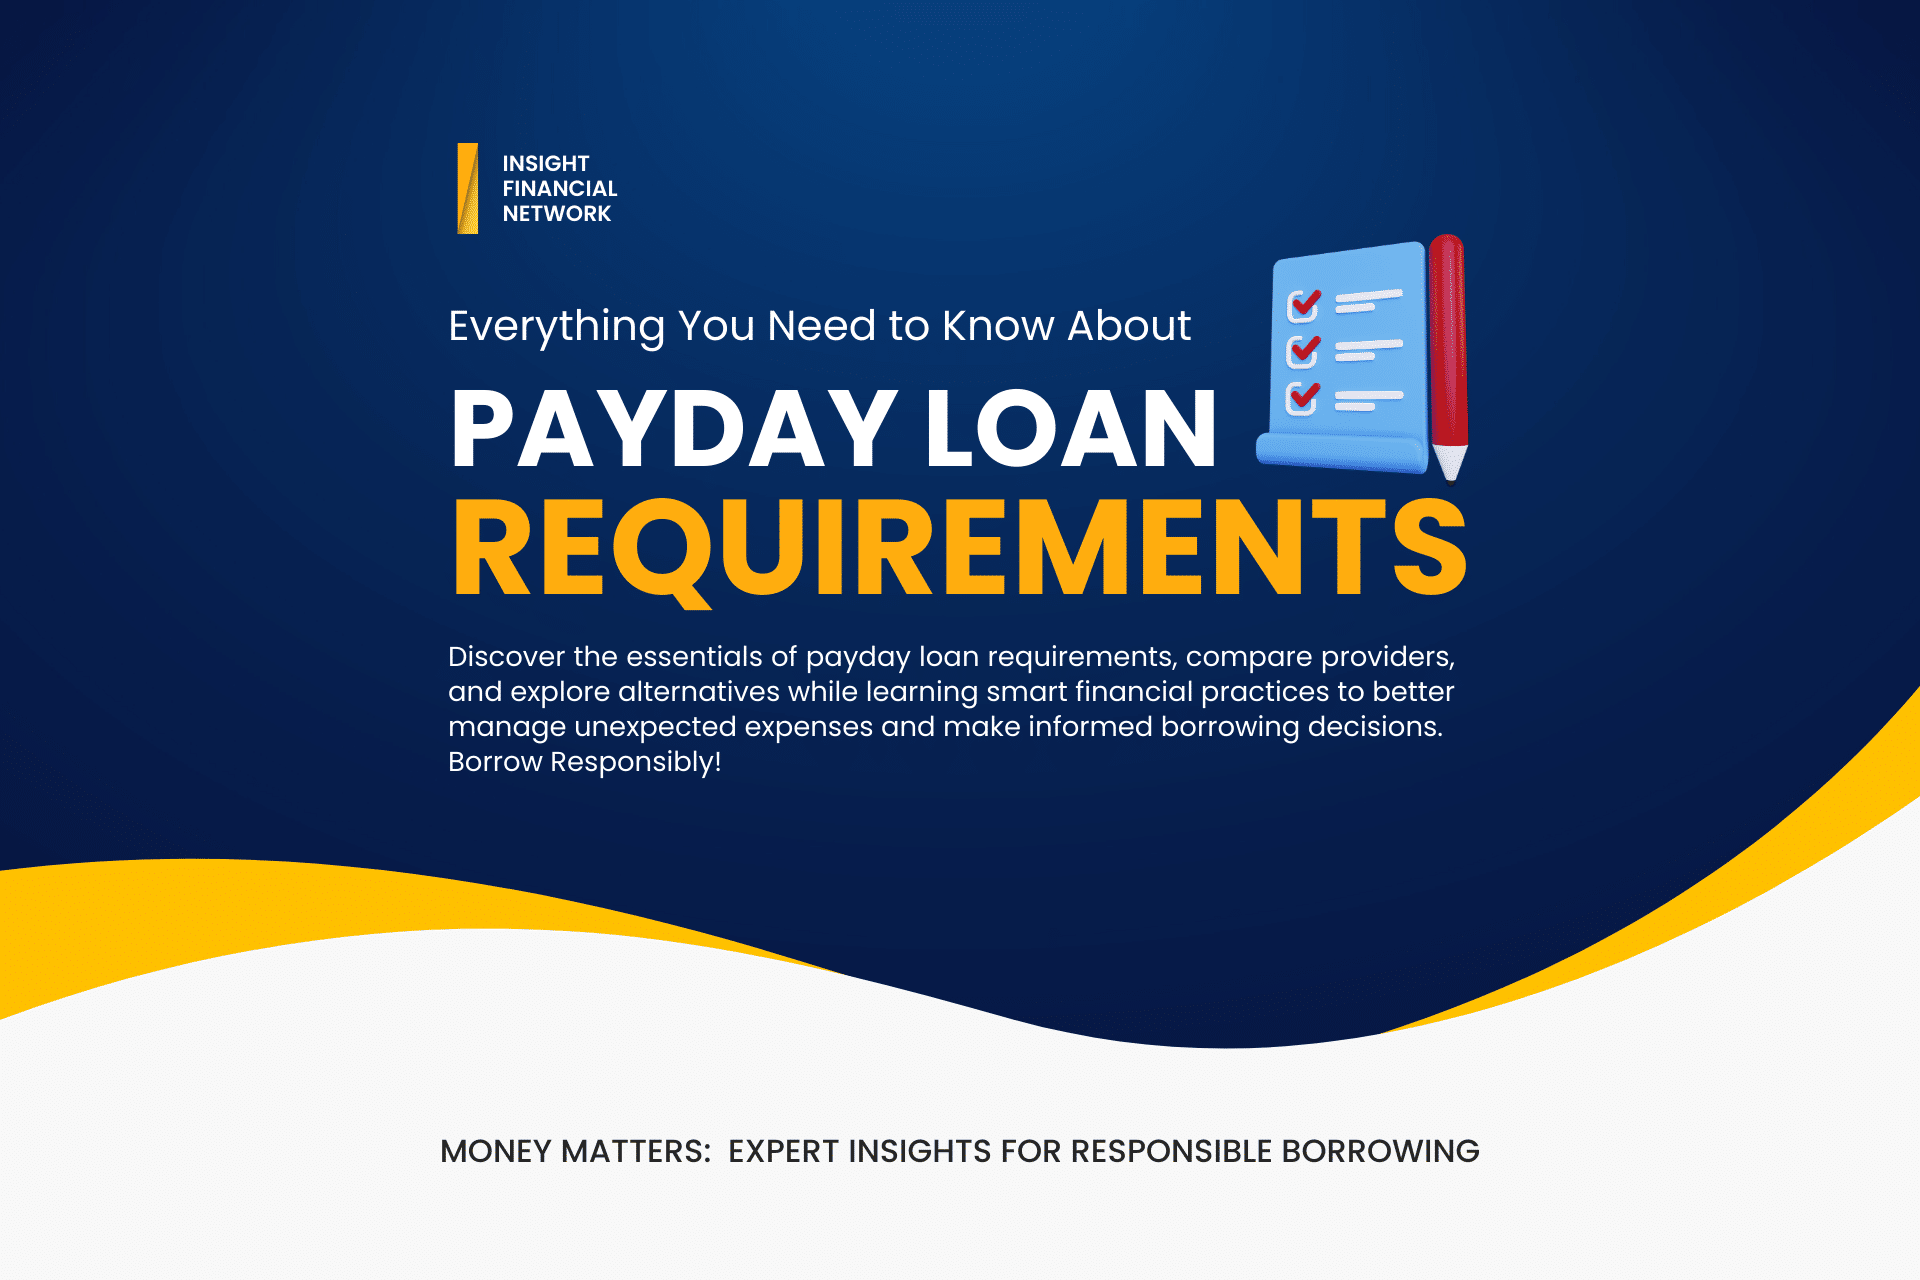 Payday Loan Requirements